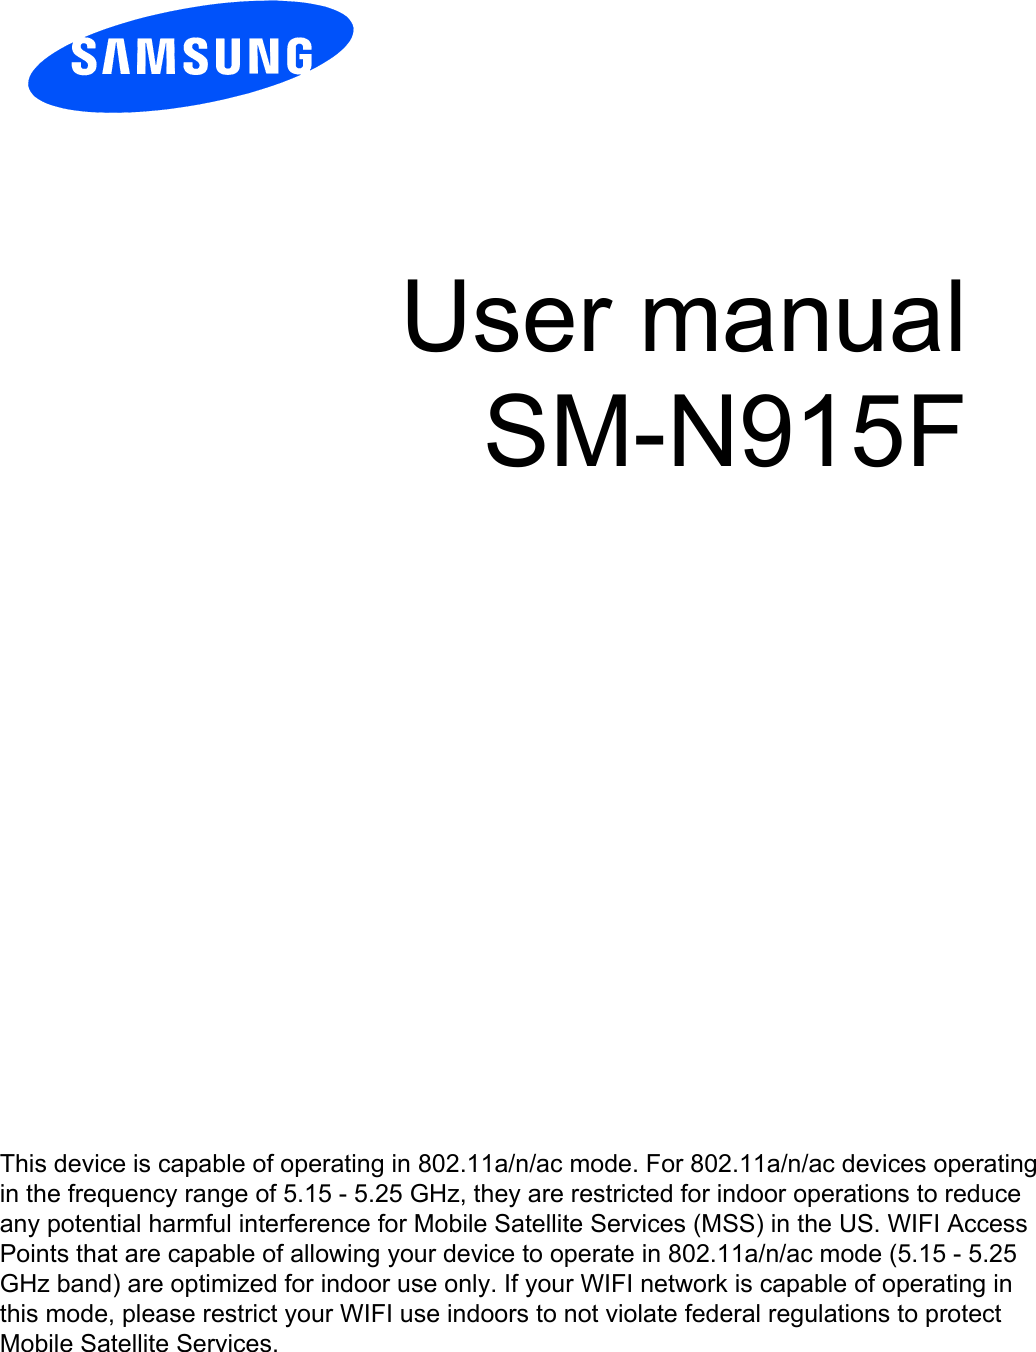 User manual SM-N915F This device is capable of operating in 802.11a/n/ac mode. For 802.11a/n/ac devices operating in the frequency range of 5.15 - 5.25 GHz, they are restricted for indoor operations to reduce any potential harmful interference for Mobile Satellite Services (MSS) in the US. WIFI Access Points that are capable of allowing your device to operate in 802.11a/n/ac mode (5.15 - 5.25 GHz band) are optimized for indoor use only. If your WIFI network is capable of operating in this mode, please restrict your WIFI use indoors to not violate federal regulations to protect Mobile Satellite Services. 